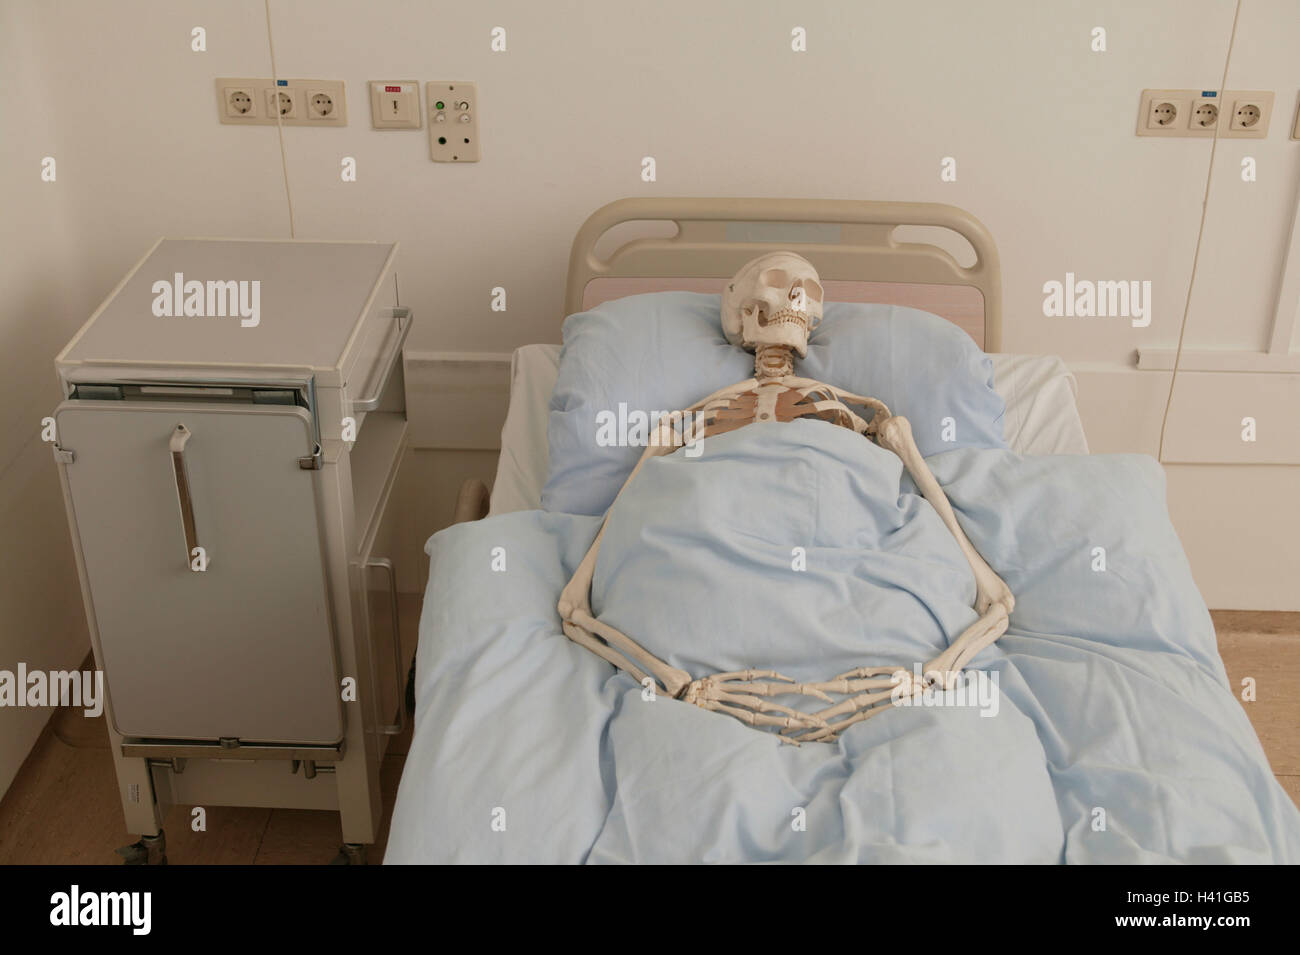 Hospital bed, skeleton, Ti7, medicine, hospital, hospital, clinic, bed, death, deadly, die, disease, incurably, fatally, health, human skeleton, humanely, ward Stock Photo